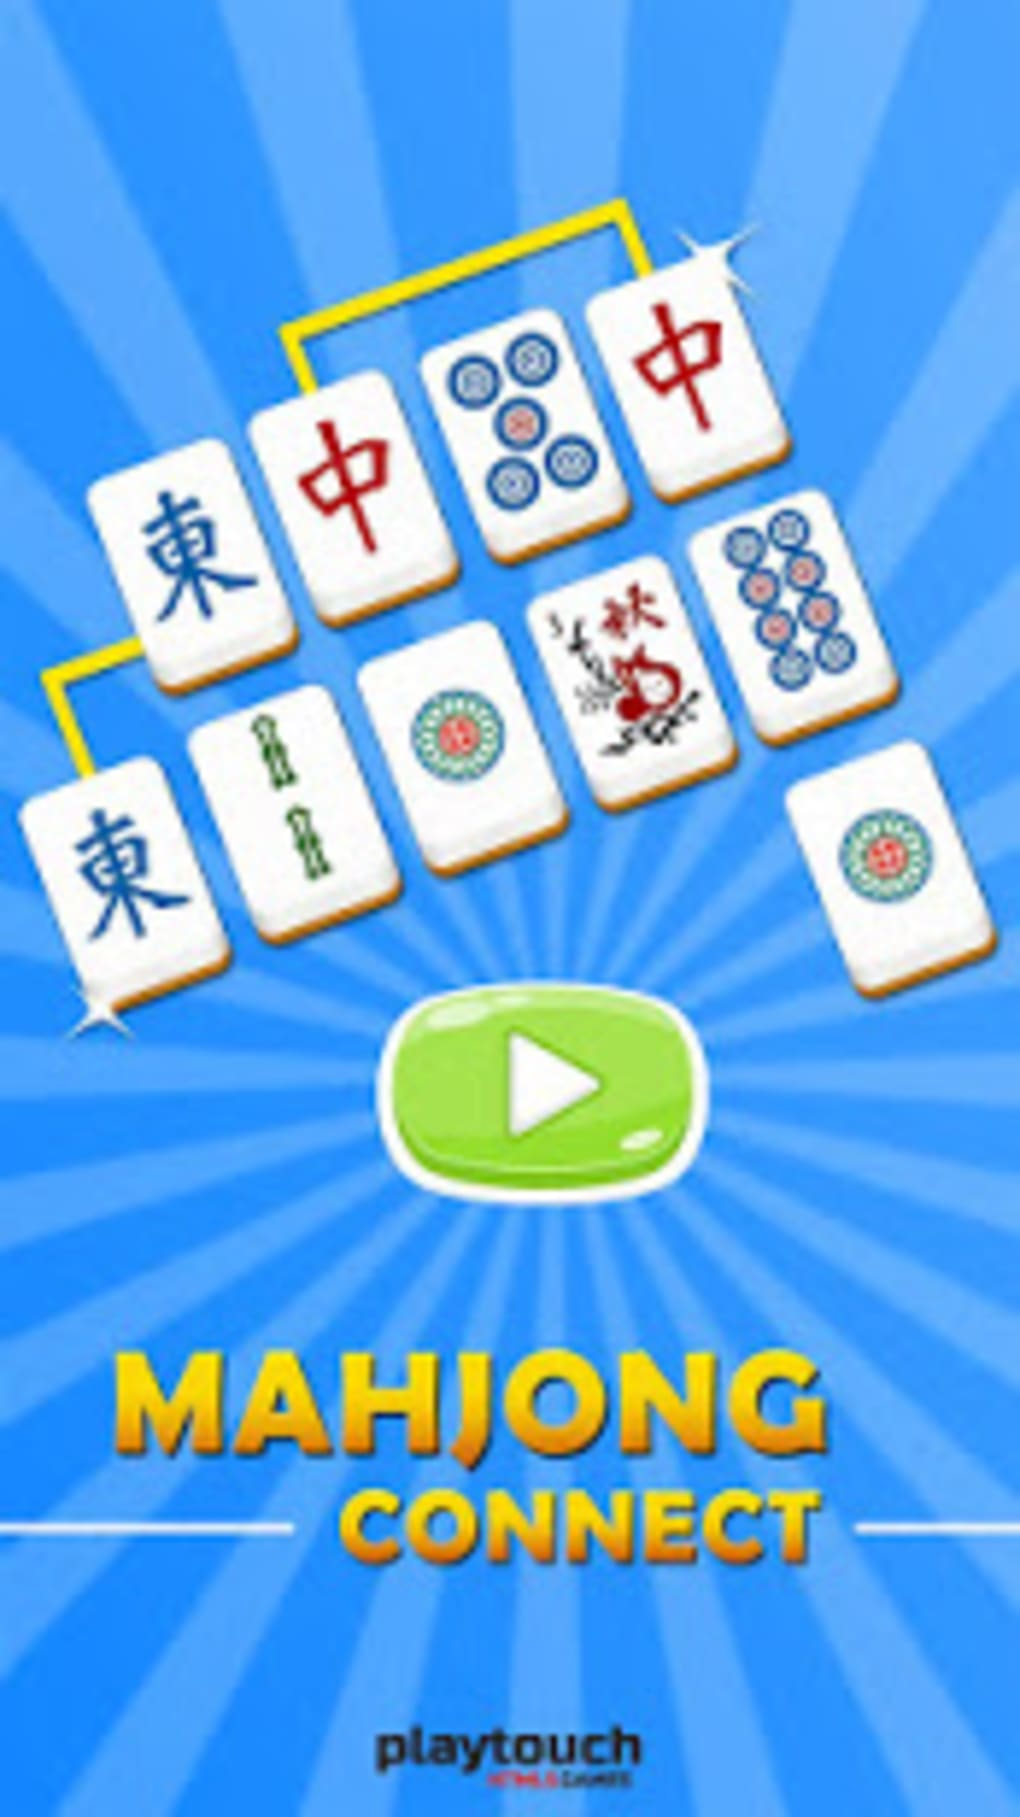 download the last version for apple Majong Classic 2 - Tile Match Adventure